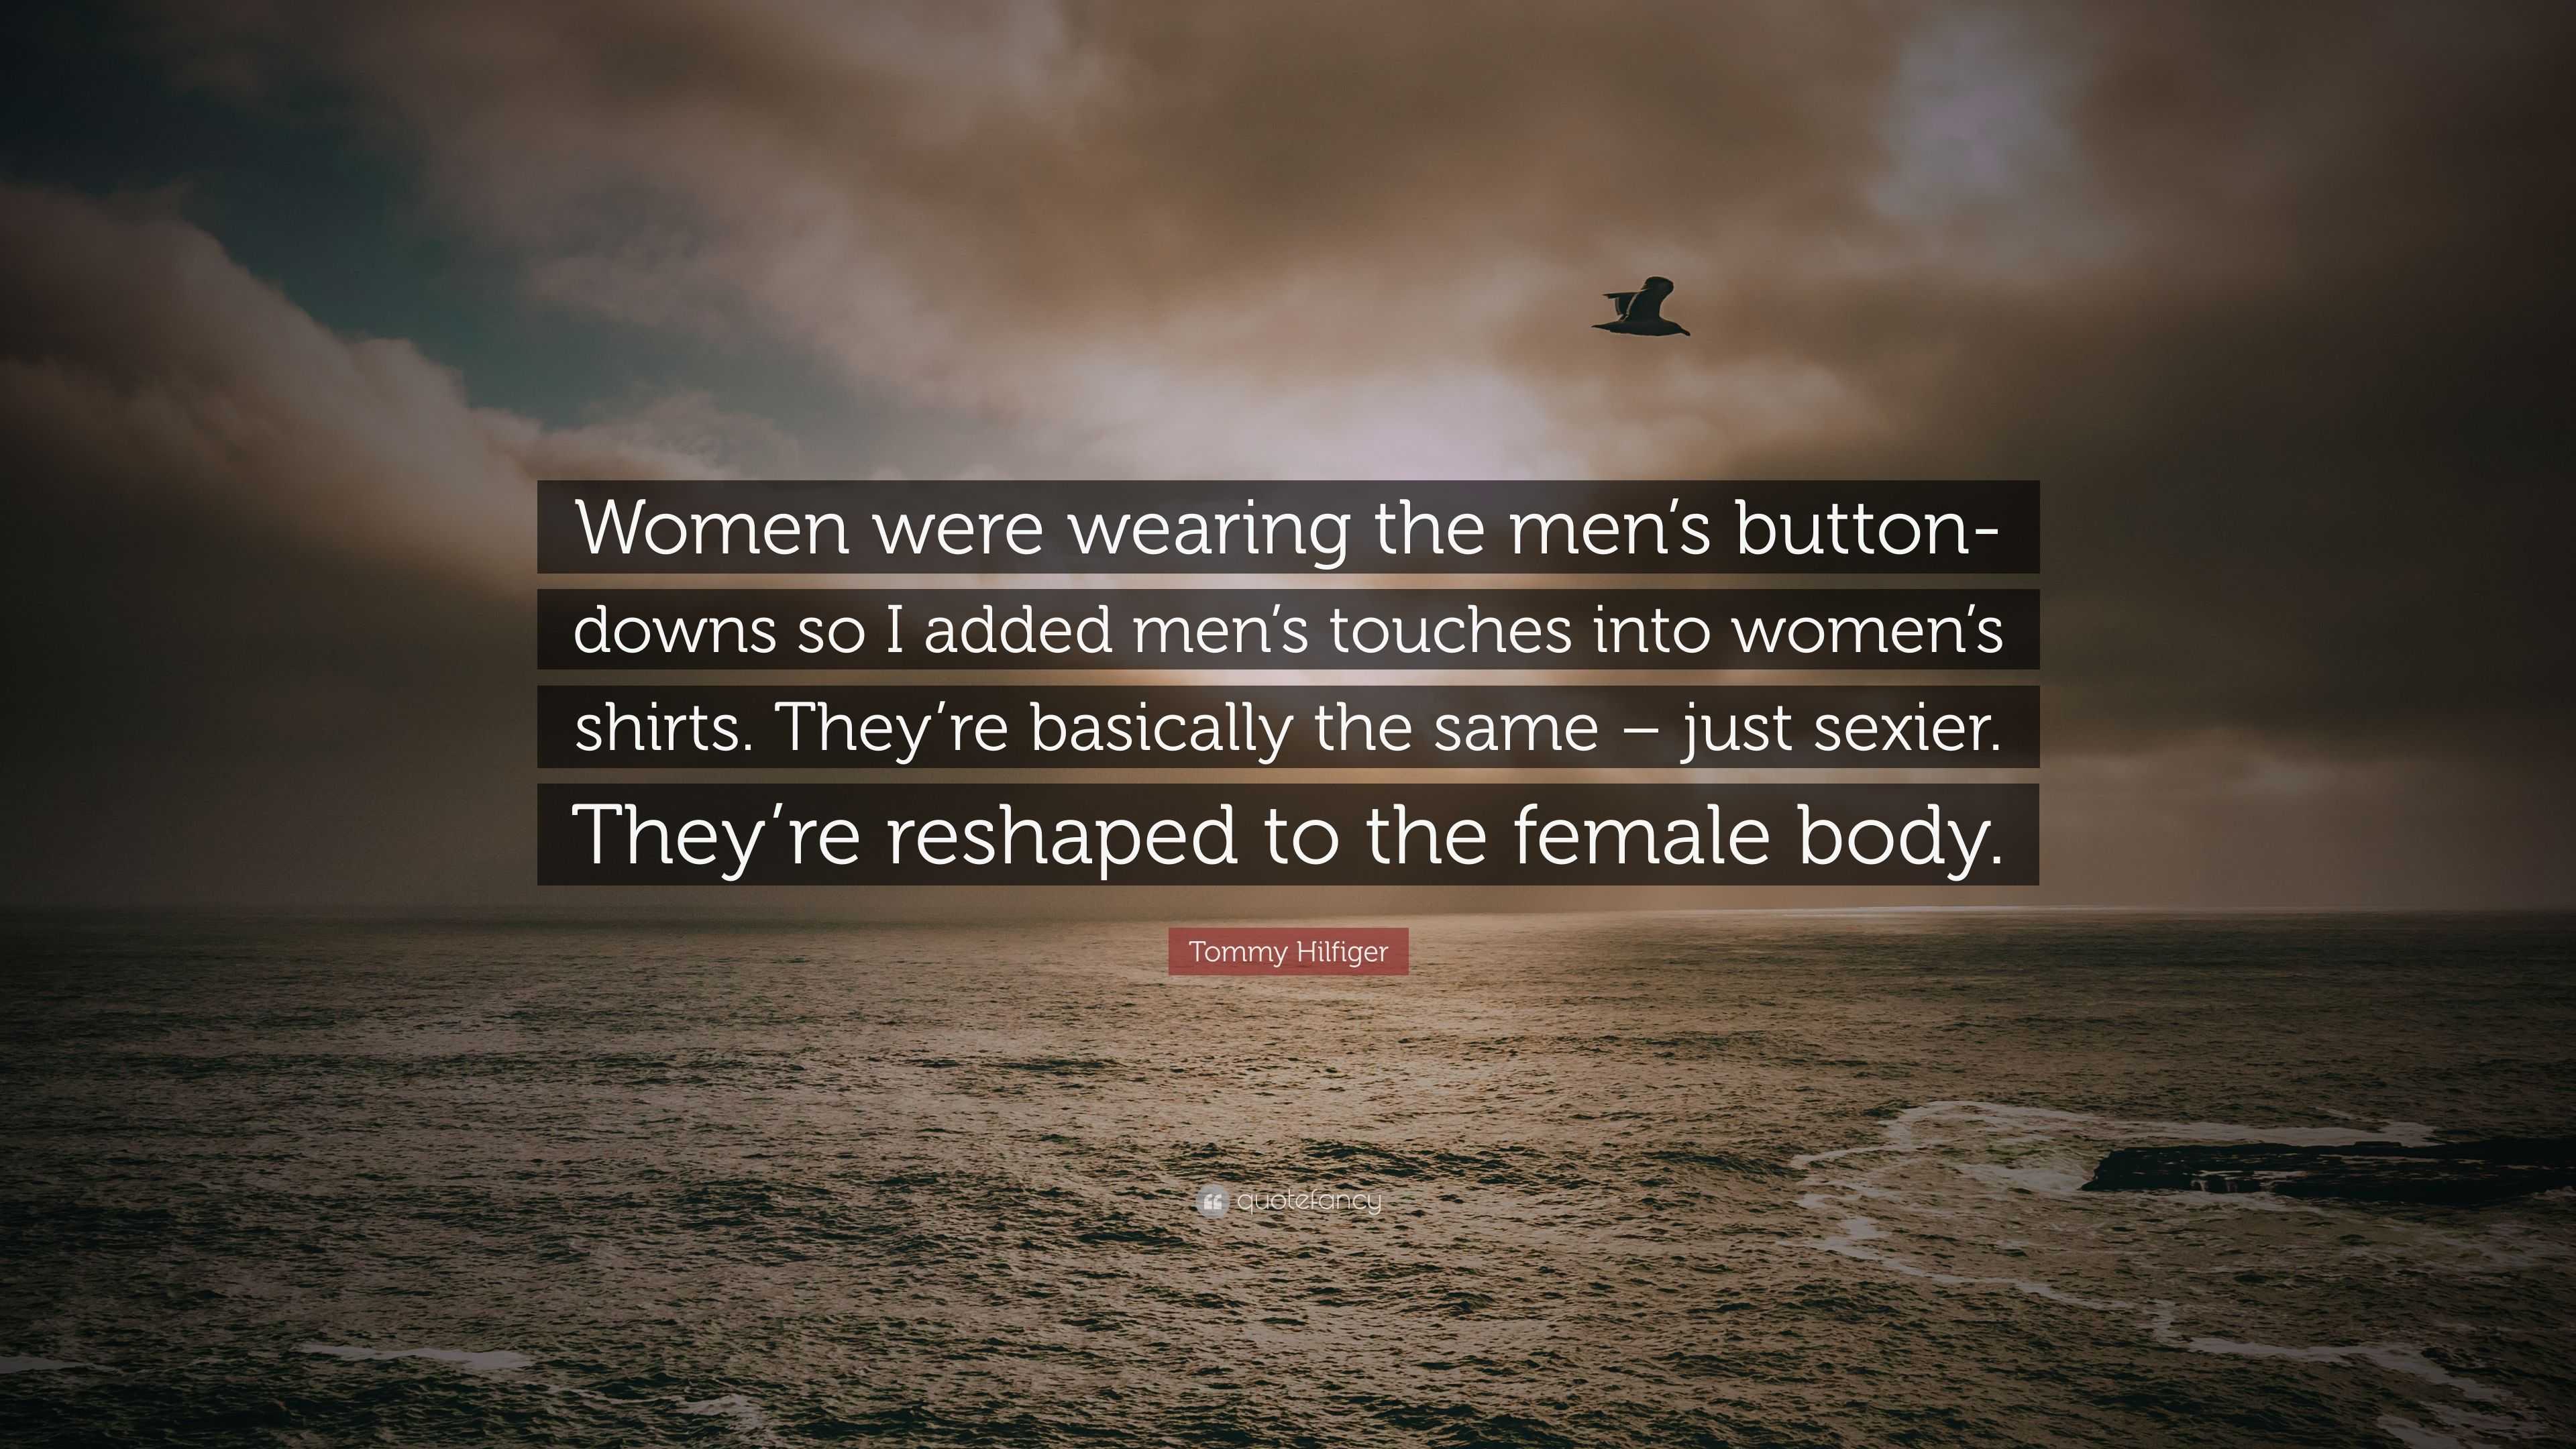 Tommy Hilfiger Quote: “Women were wearing the men's button-downs